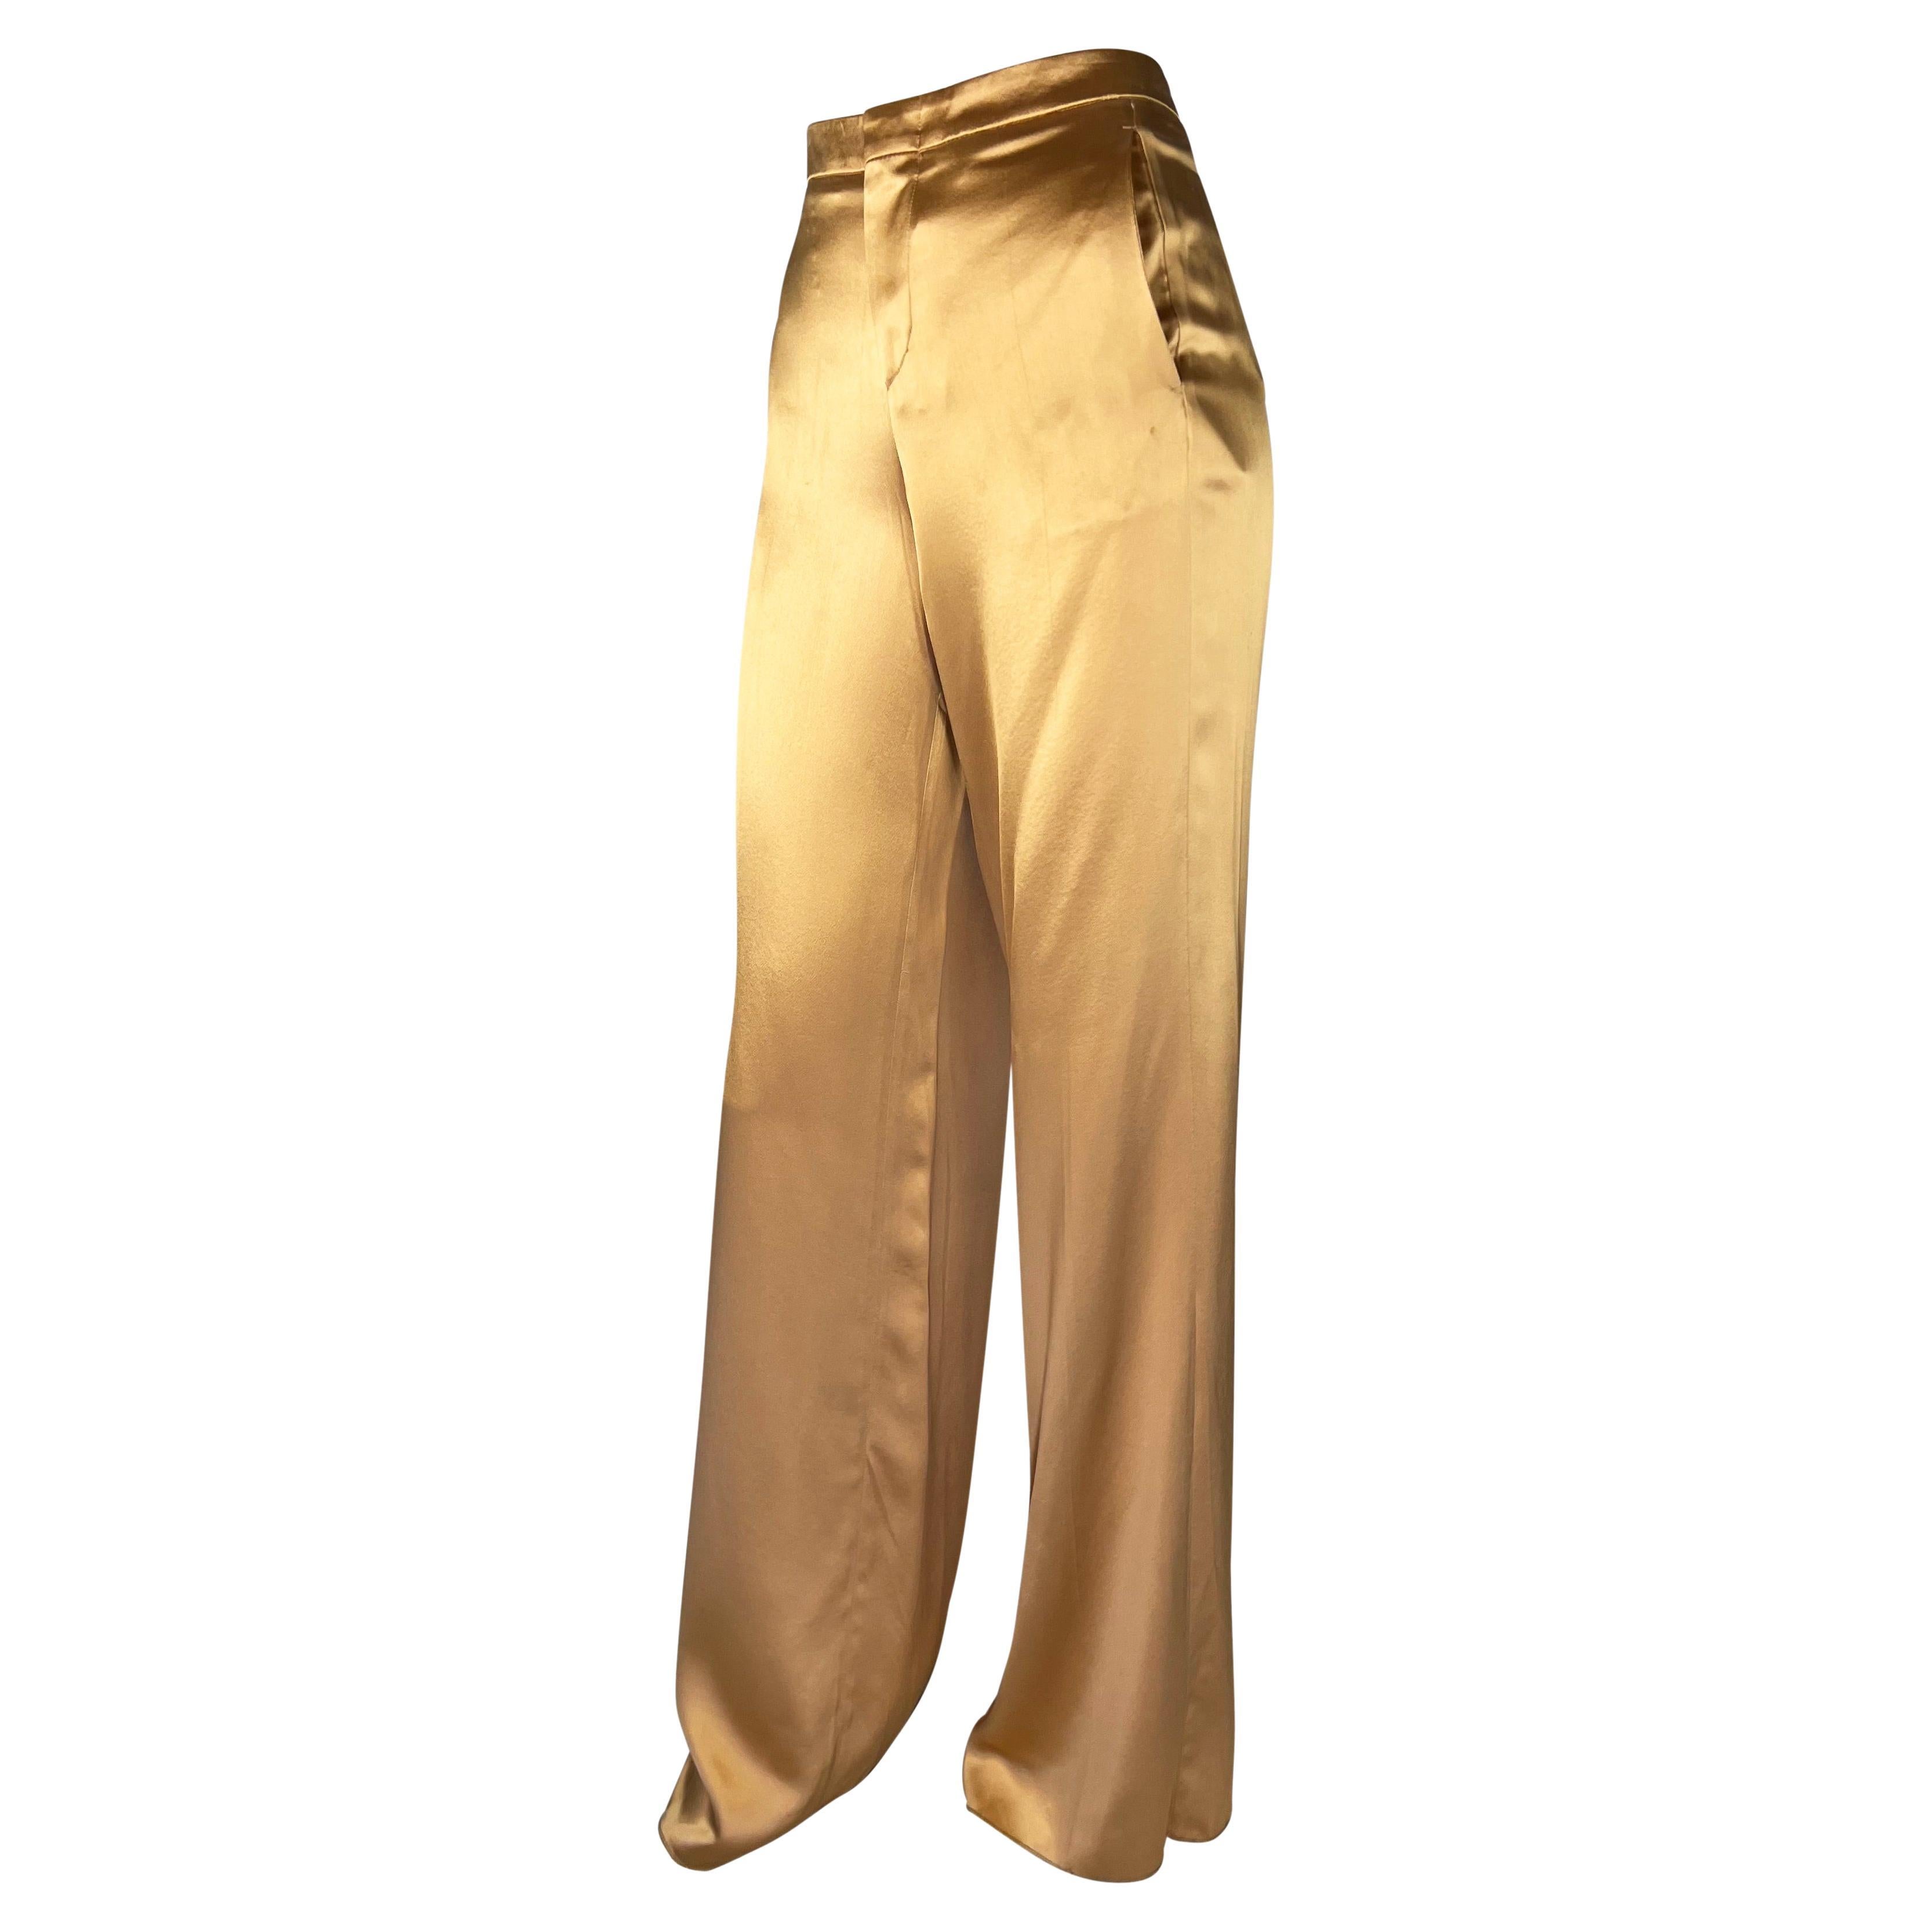 Presenting a luxurious pair of golden silk-blend pants designed by Tom Ford for Gucci's Spring/Summer 2001 collection. The silk and viscose blend and wide-leg construction give these pants a shimmering appearance that beautifully captures light and